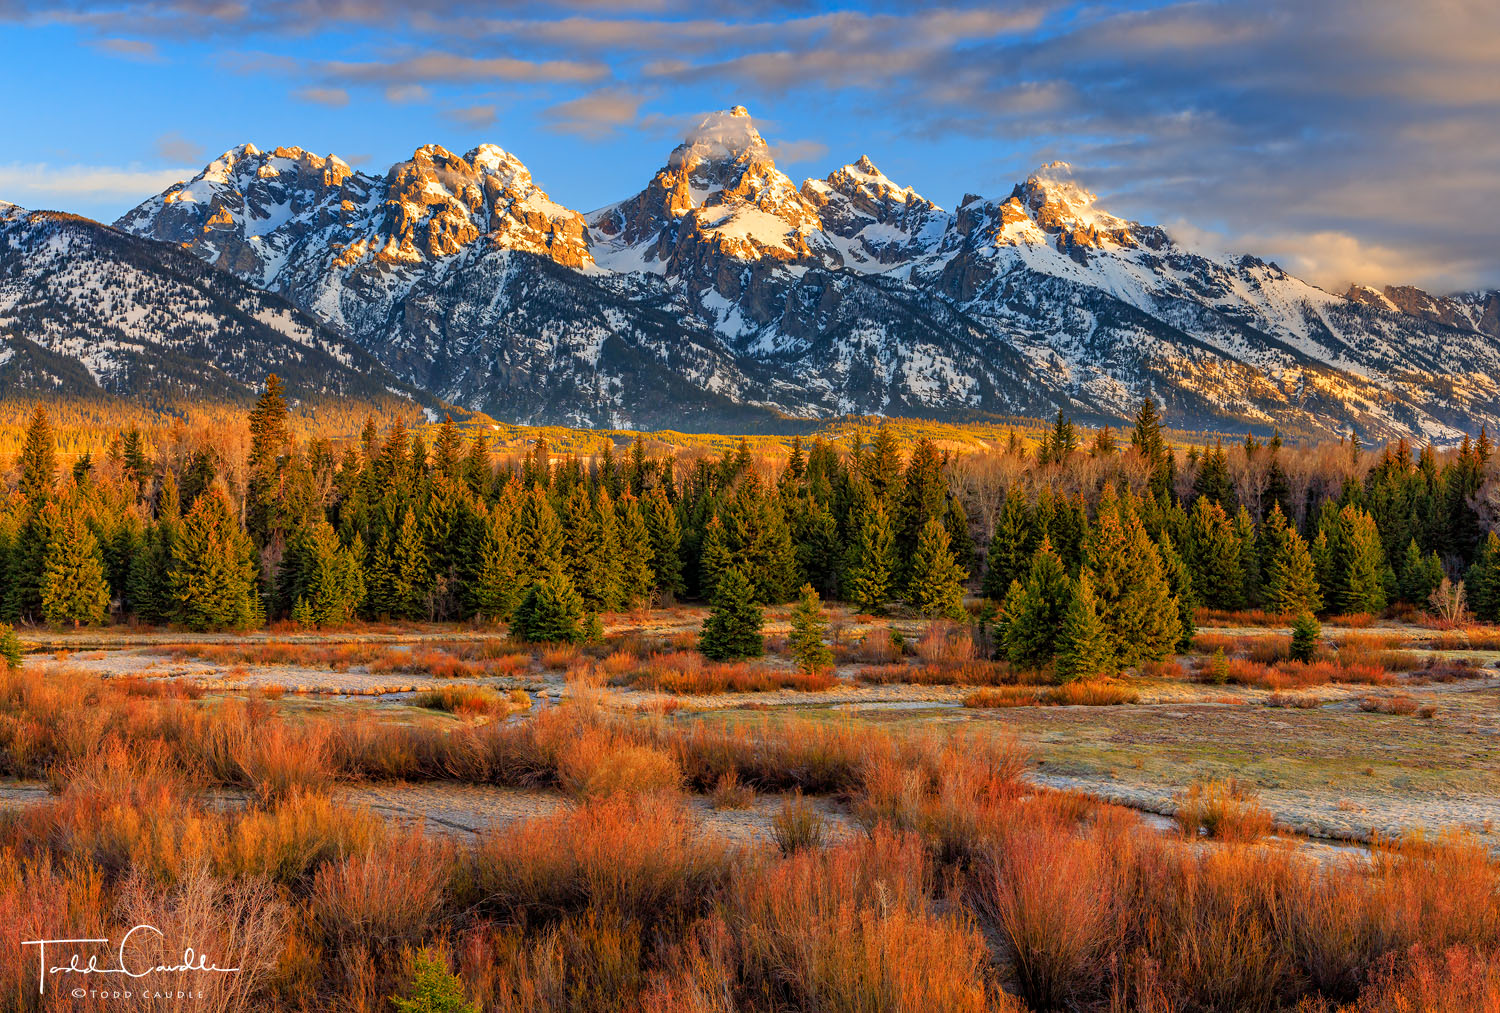 Sunrise over Blacktail Ponds as clouds form over the Grand Teton and the Teton Range.